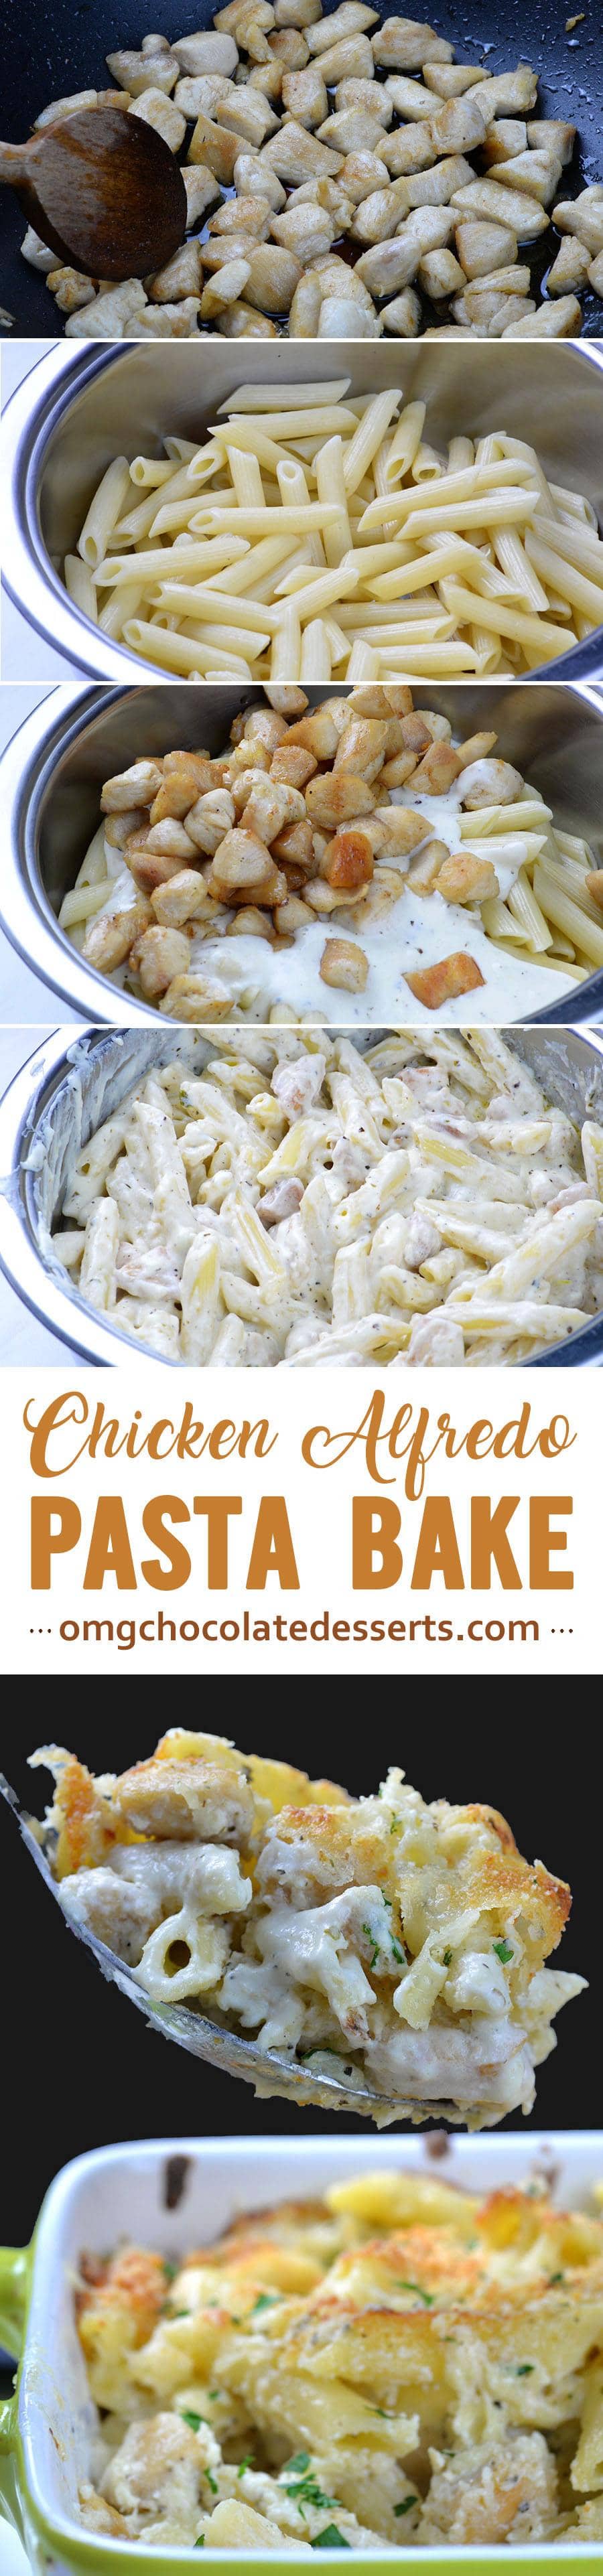 Chicken Alfredo Bake is EASY WEEKNIGHT DINNER CASSEROLE version of family favorite Chicken Alfredo. Cheesy, white sauce chicken Parmesan pasta is delicious, warm comfort food for cold winter nights!